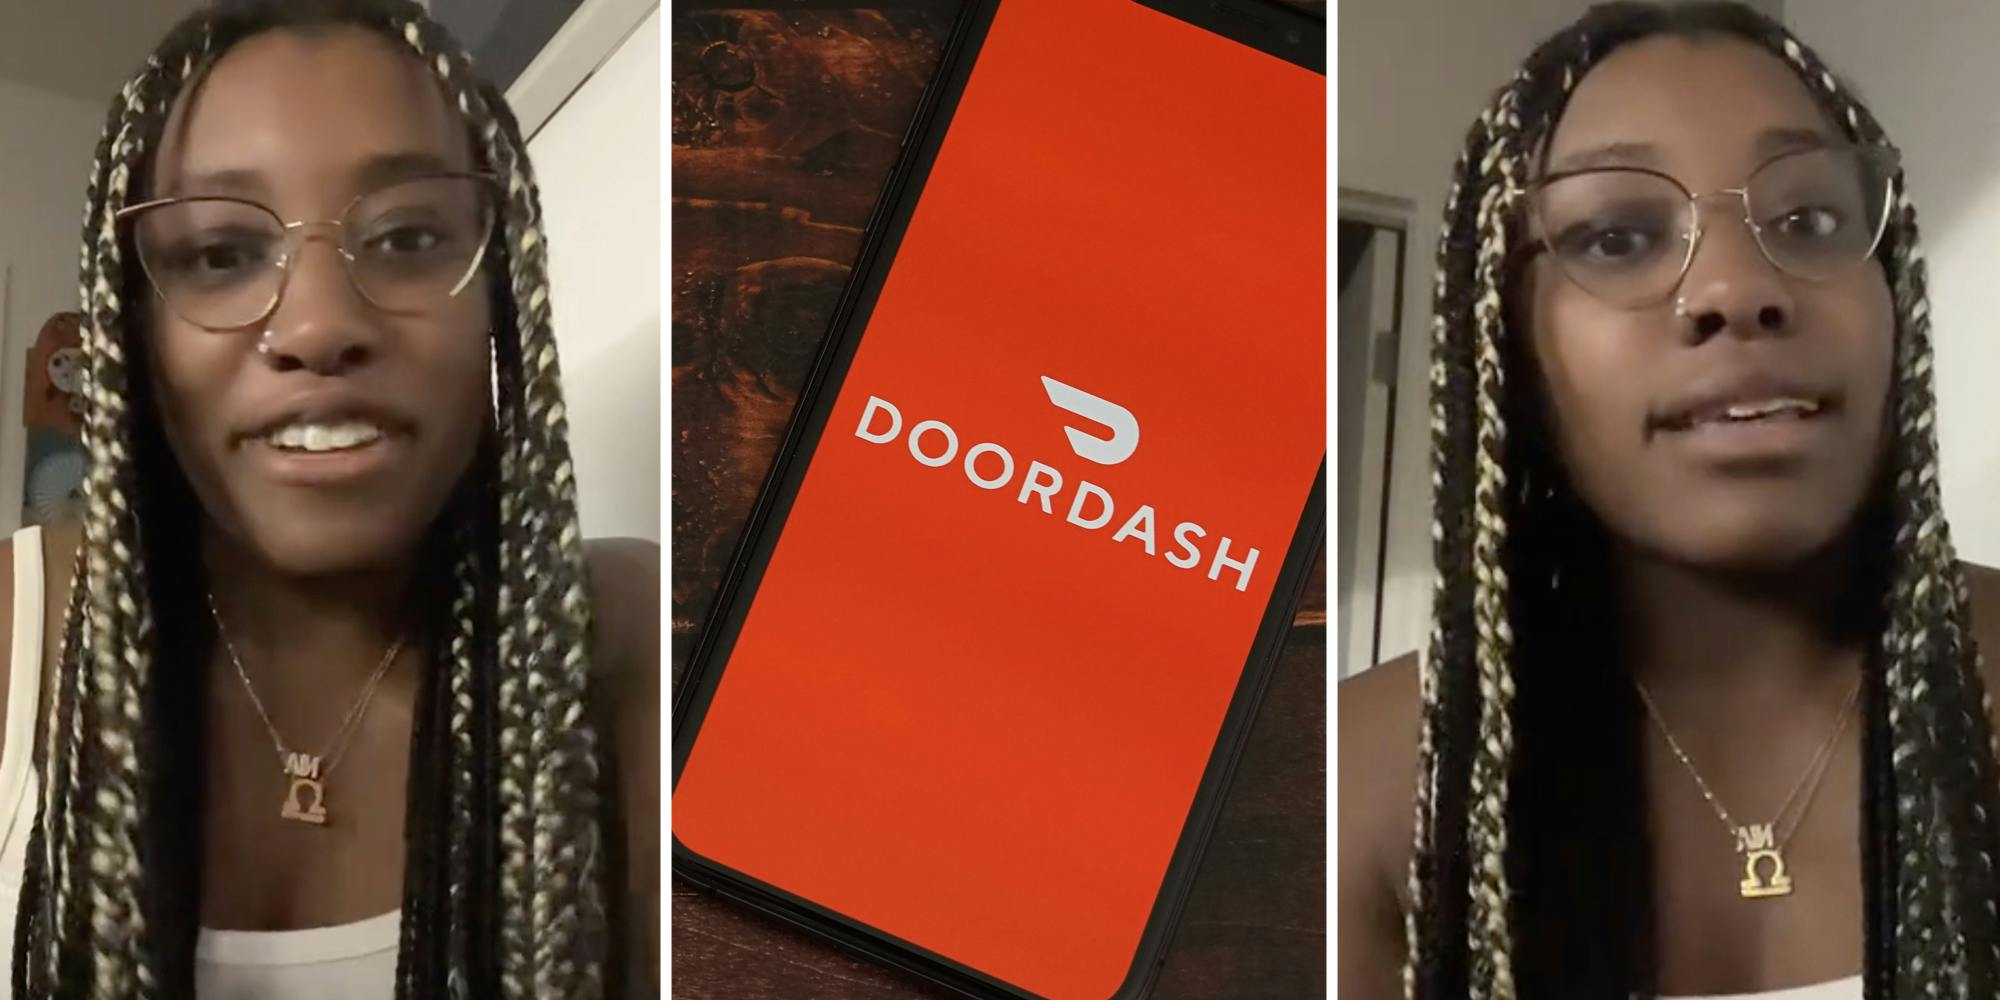 ‘It wasn’t my fault’: Woman says her DoorDash driver got hit by a car while delivering her order. Then DoorDash charged her for it